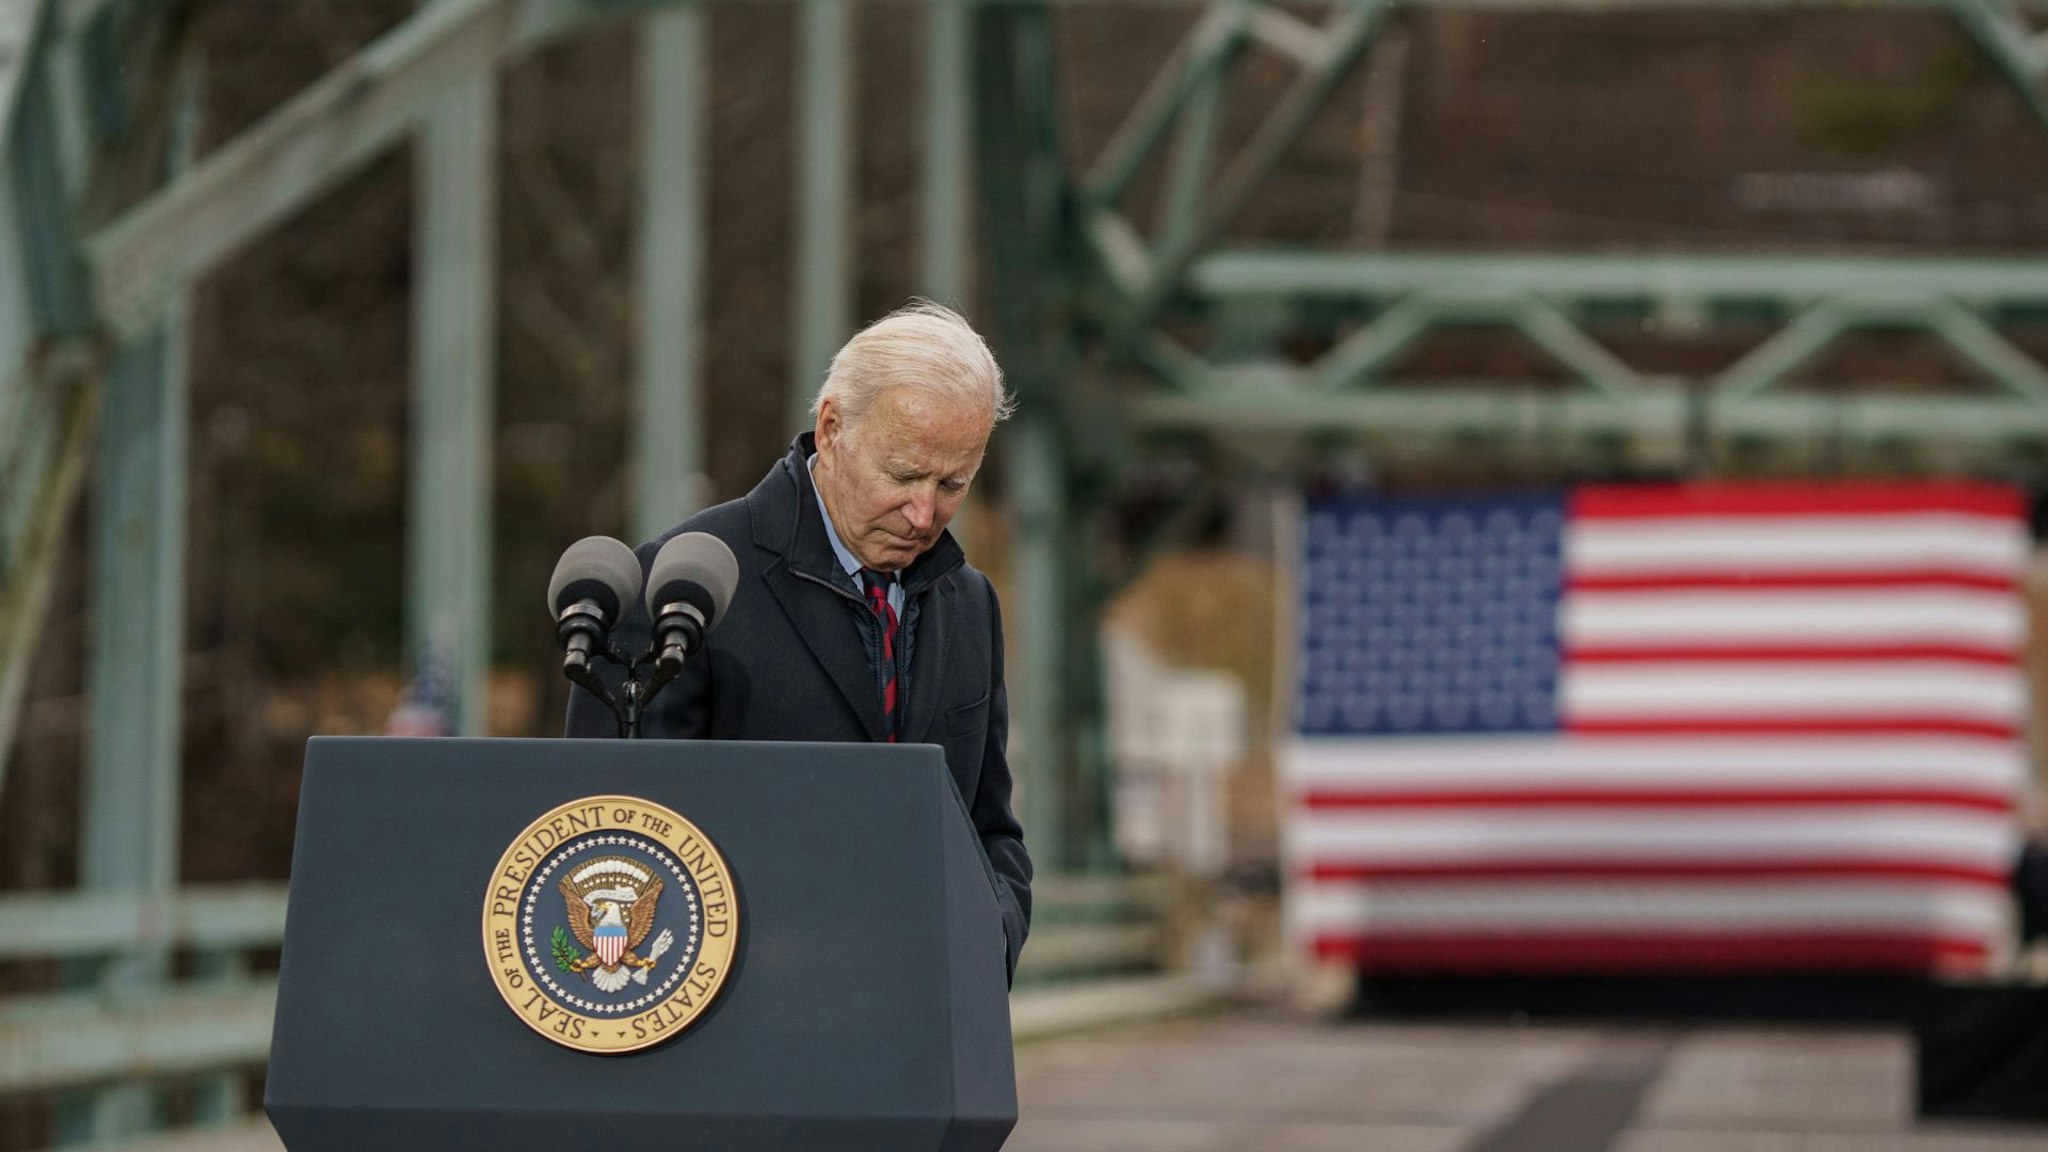 WOODSTOCK, NH - NOVEMBER 16: US President Joe Biden delivers a speech on infrastructure while visiting the NH 175 bridge spanning the Pemigewasset River on November 16, 2021 in Woodstock, New Hampshire. The visit to the bridge, listed in poor condition since 2013, follows the signing of the $1.2 trillion infrastructure bill on Monday.